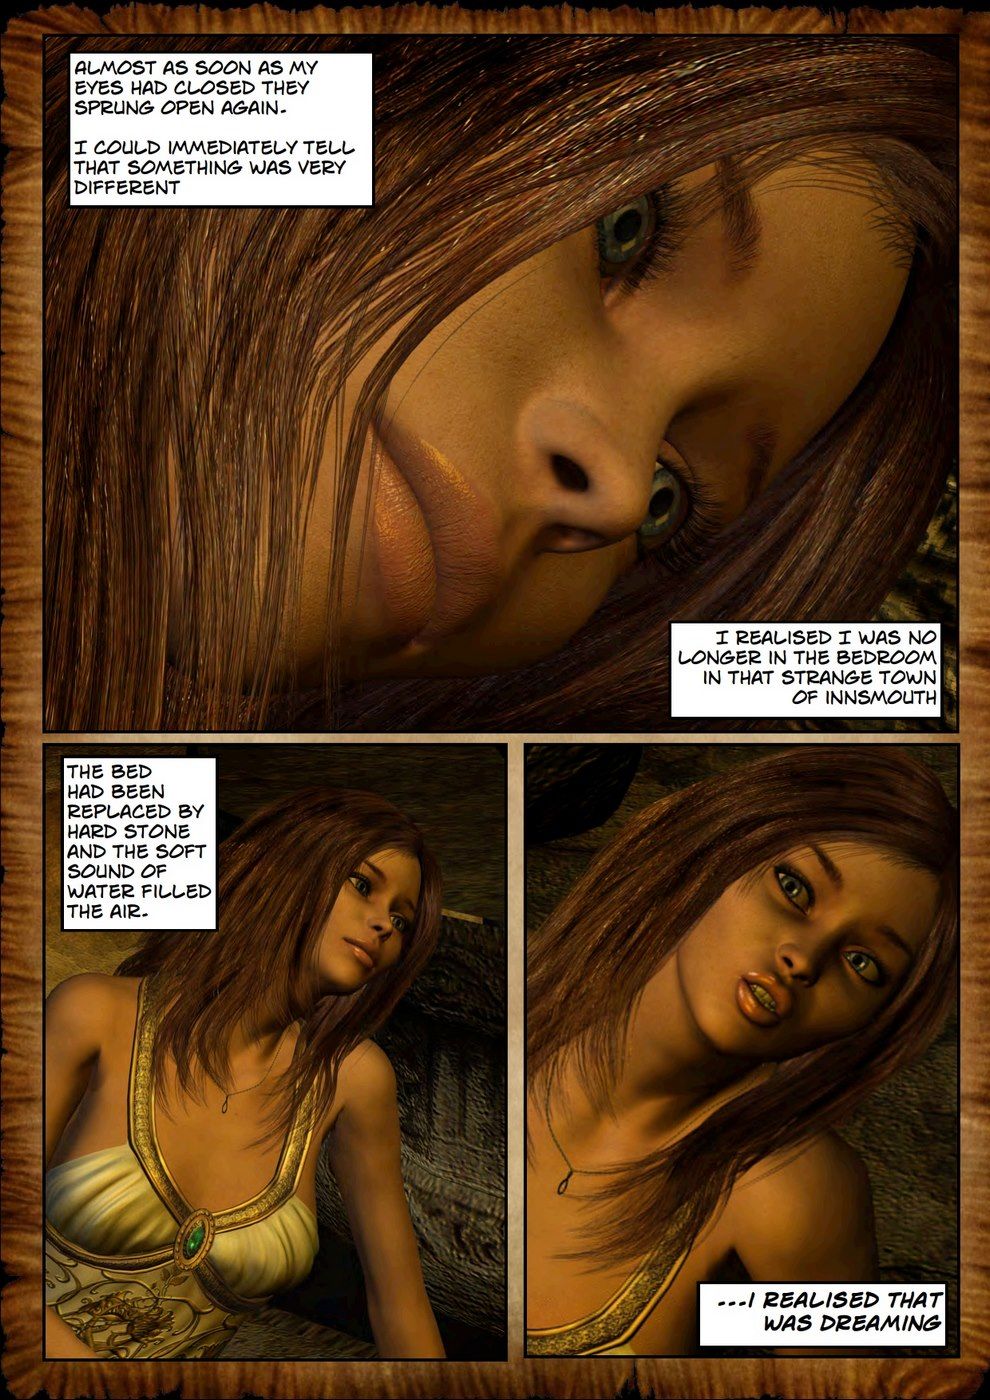 Shadows of Innsmouth Part 2 - Taboo Studios page 2